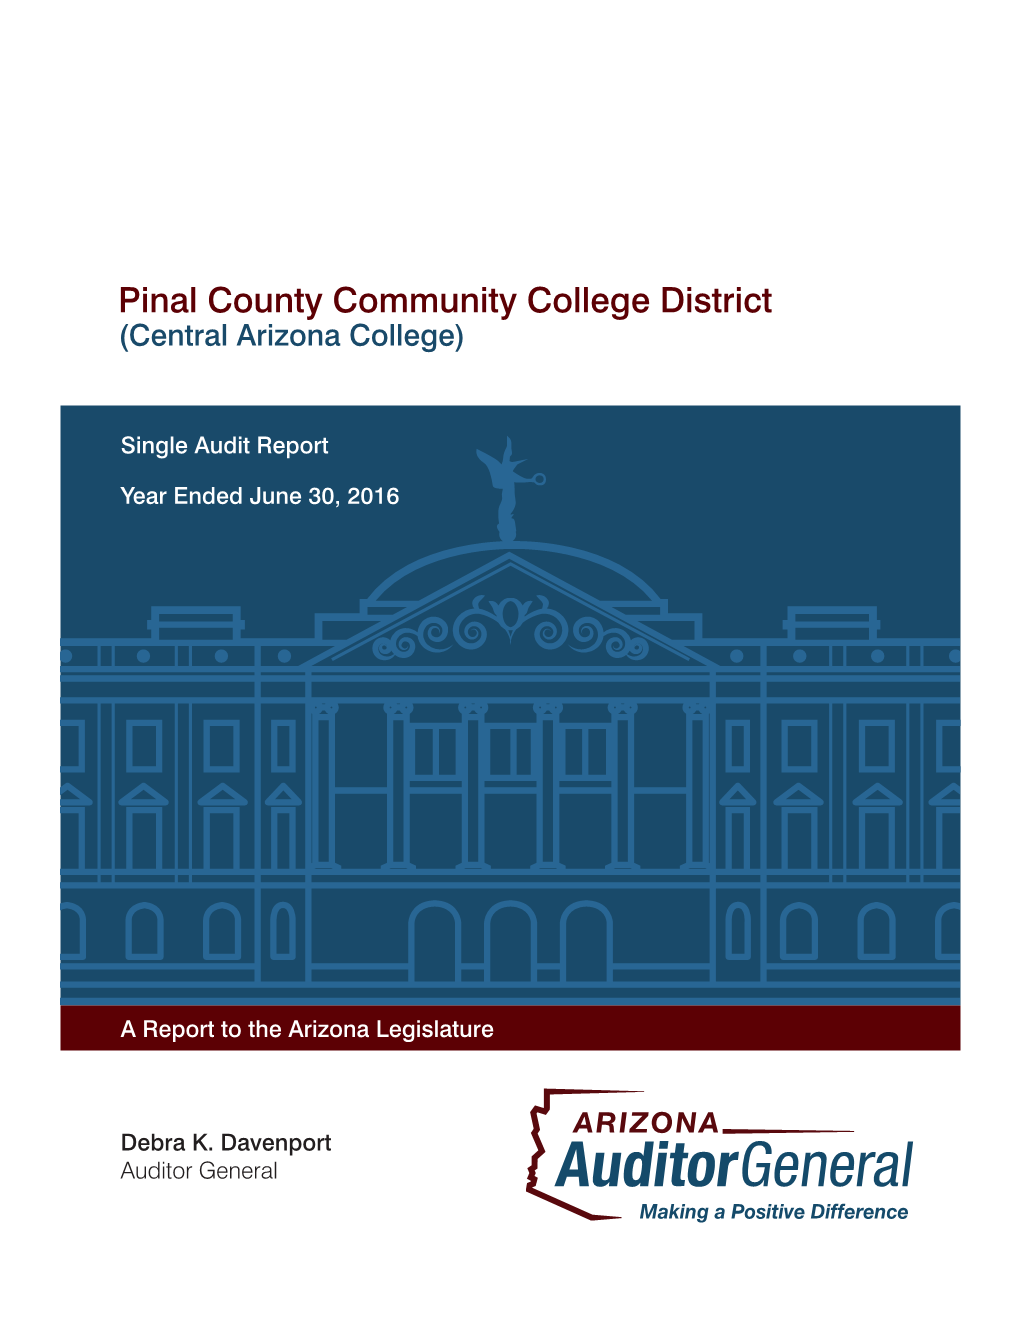 Pinal County Community College District (Central Arizona College)